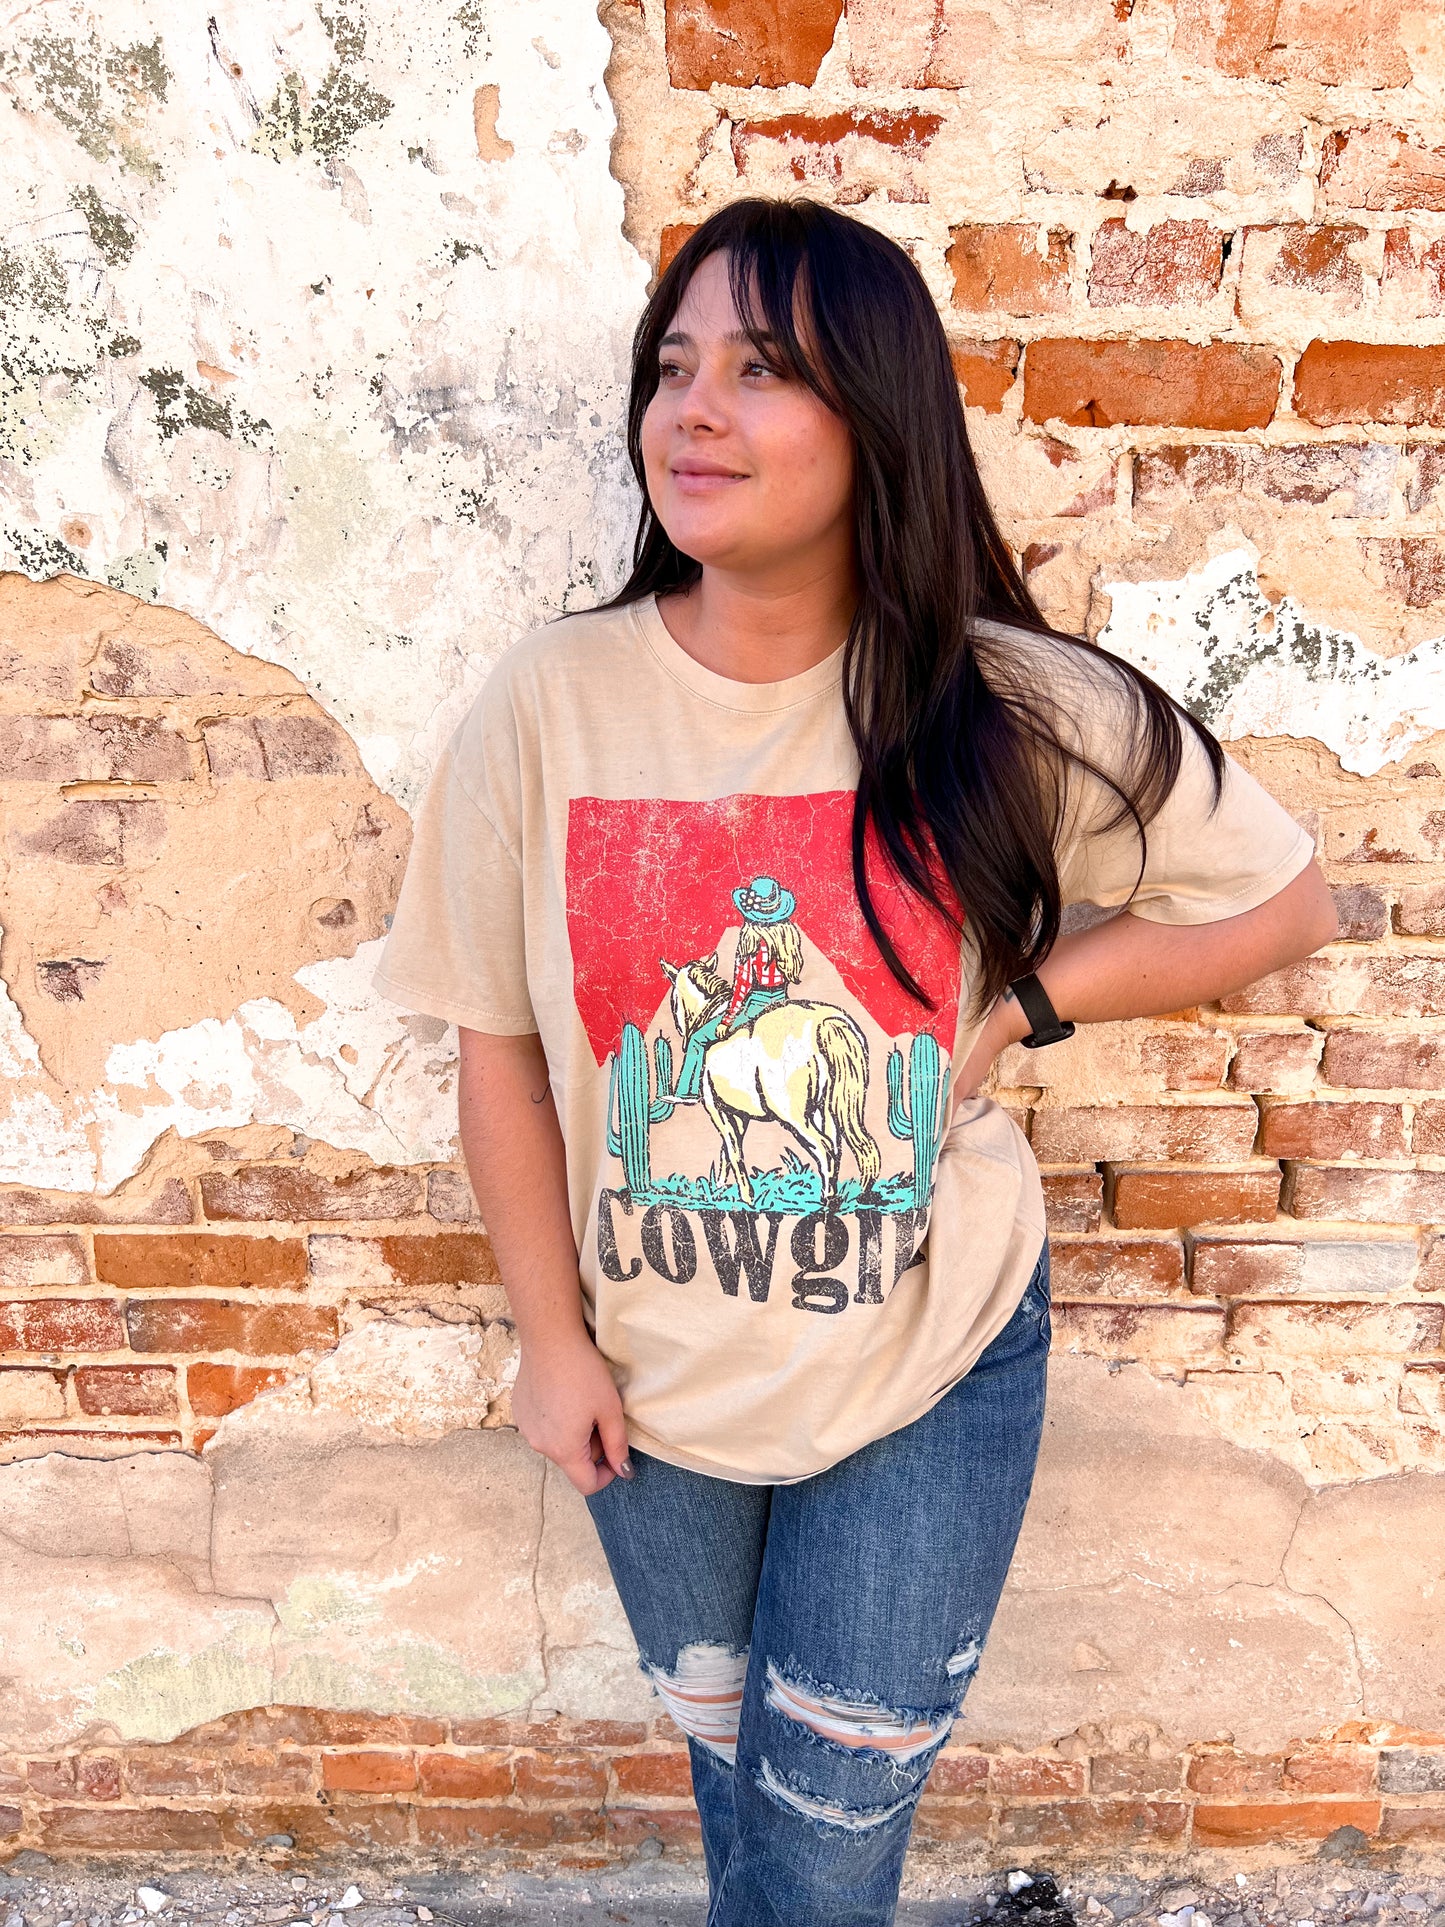 Premium Washed Graphic Cowgirl Top Oversized-Top-tres bien-11/28/23 md, 1st md, 8/22/23-The Twisted Chandelier